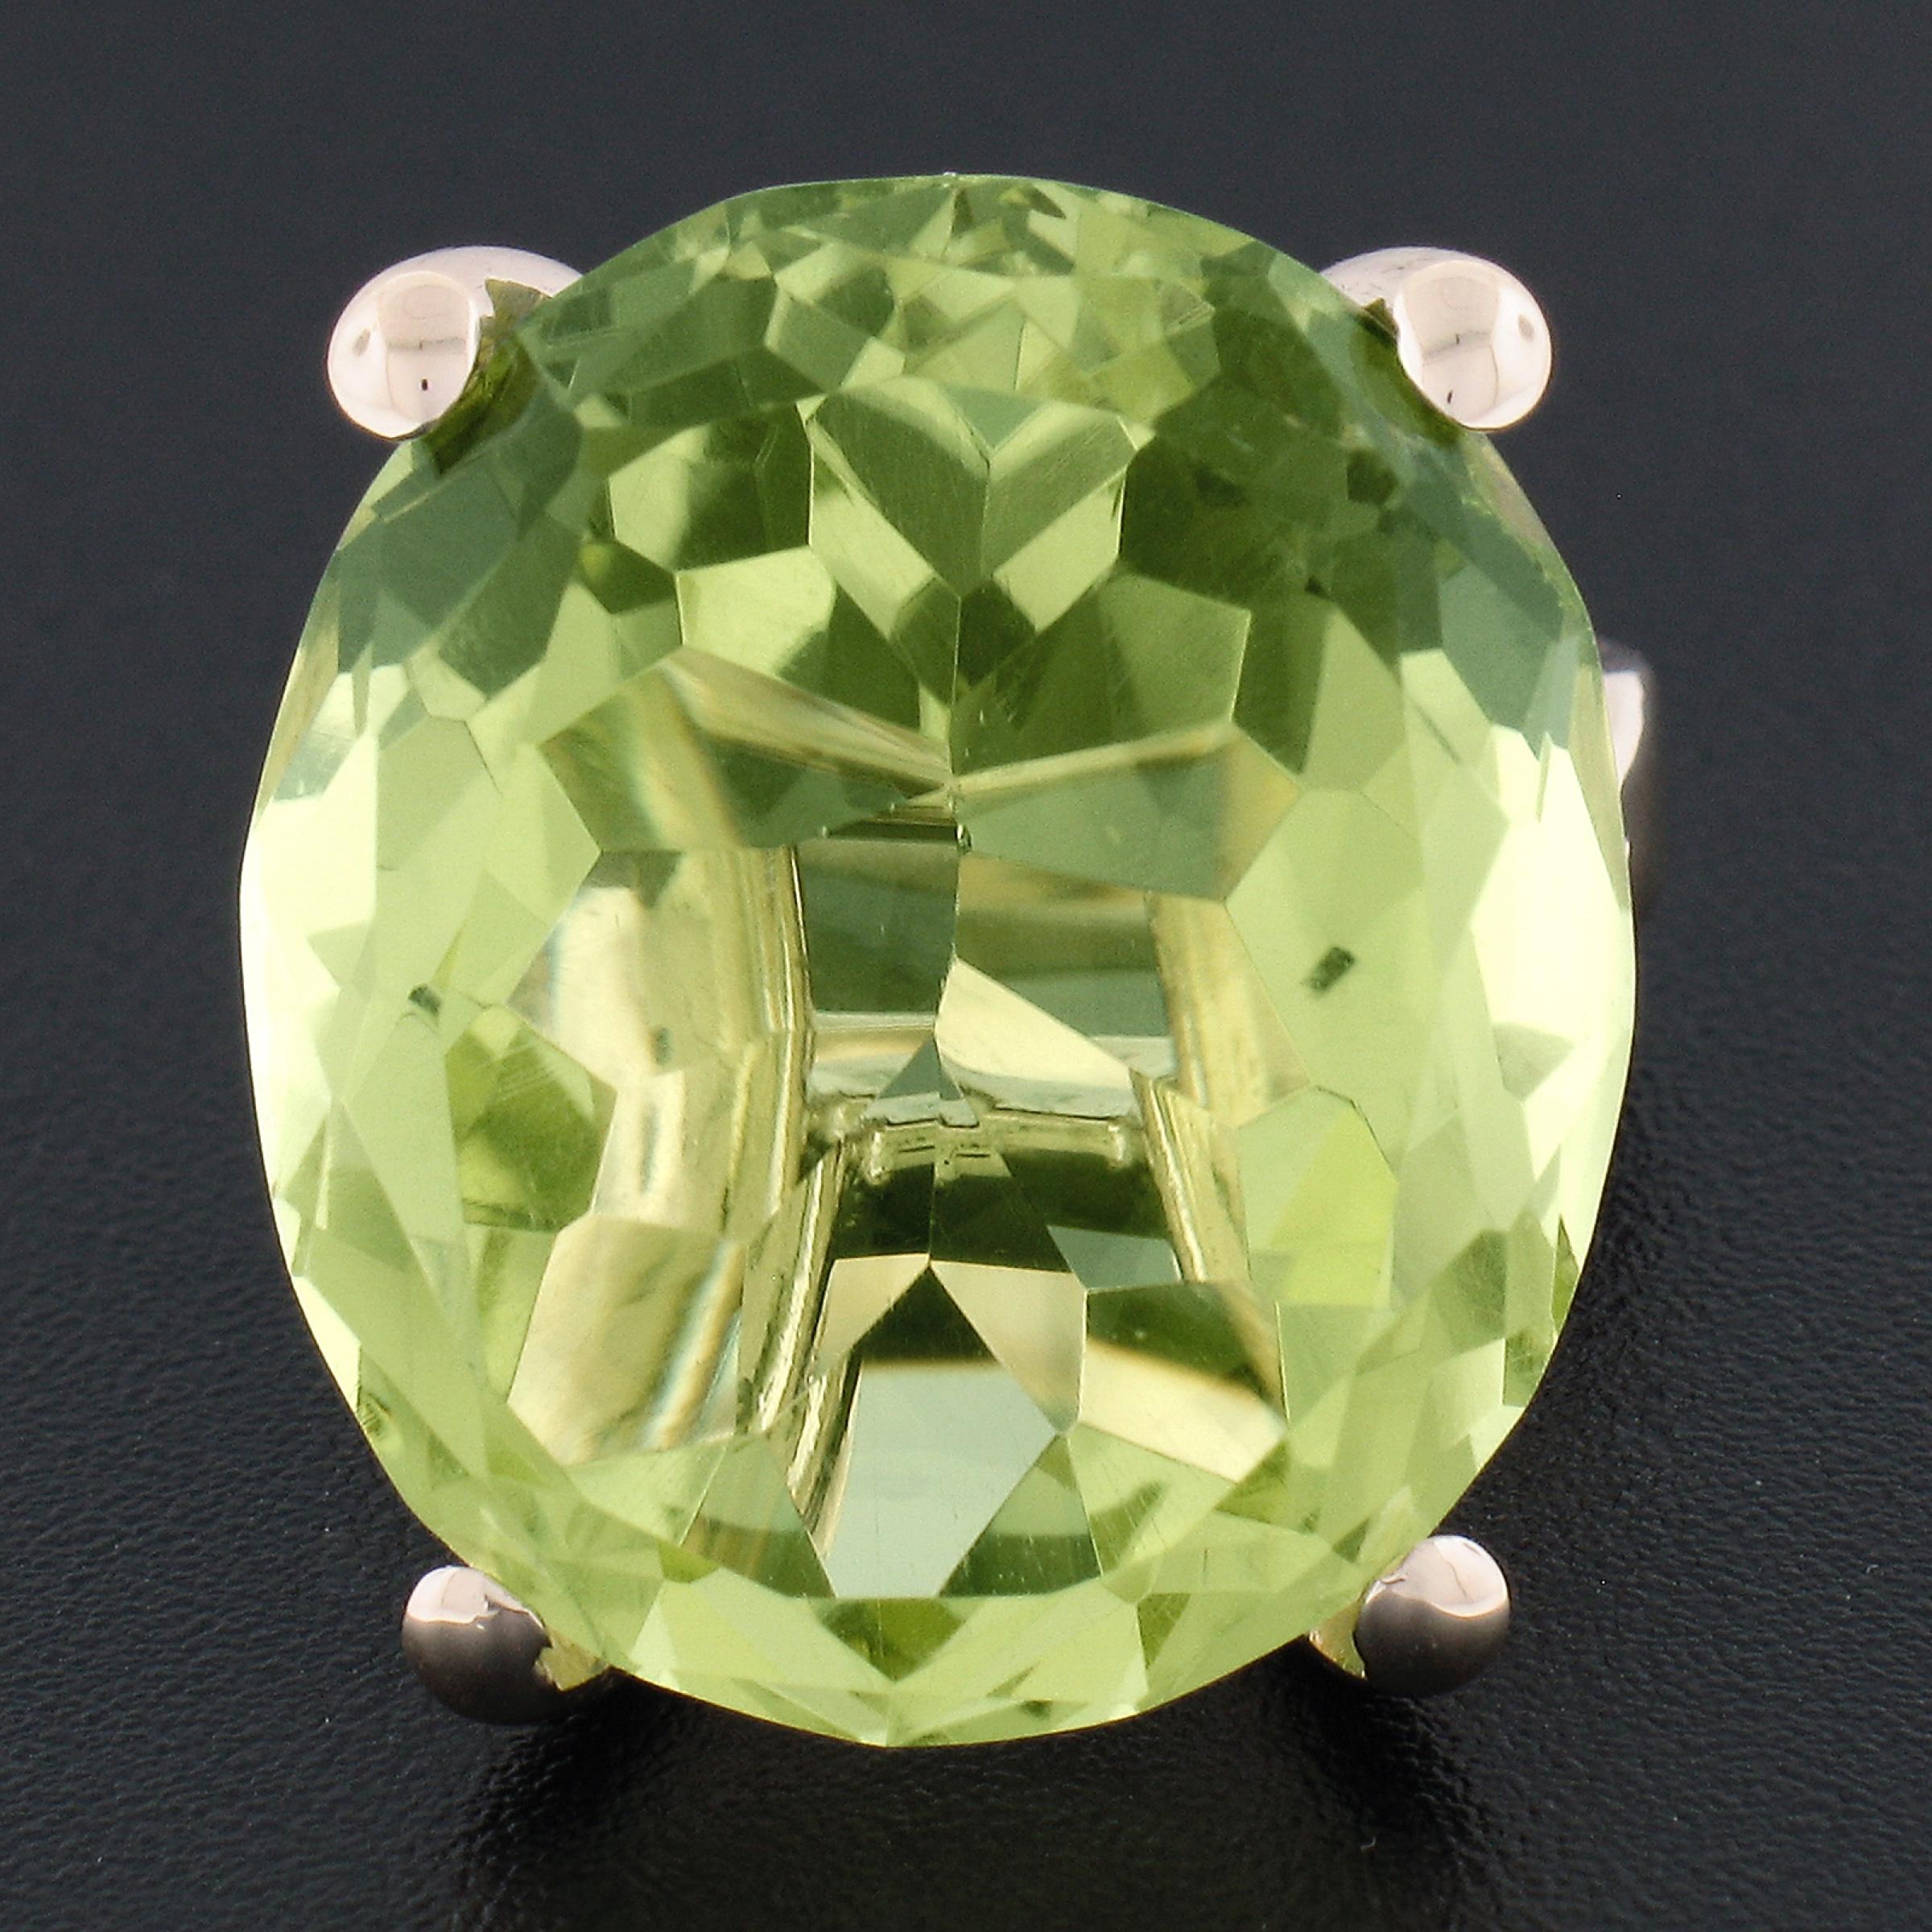 --Stone(s):--
(1) Natural Genuine Lemon Quartz - Oval Cut - Prong Set - Yellowish Green Color - 21.5x18.6mm (approx.)

Material: Solid 14K Yellow Gold
Weight: 10.85 Grams
Ring Size: 6.5 (Fitted on a finger. We can custom size this ring - please